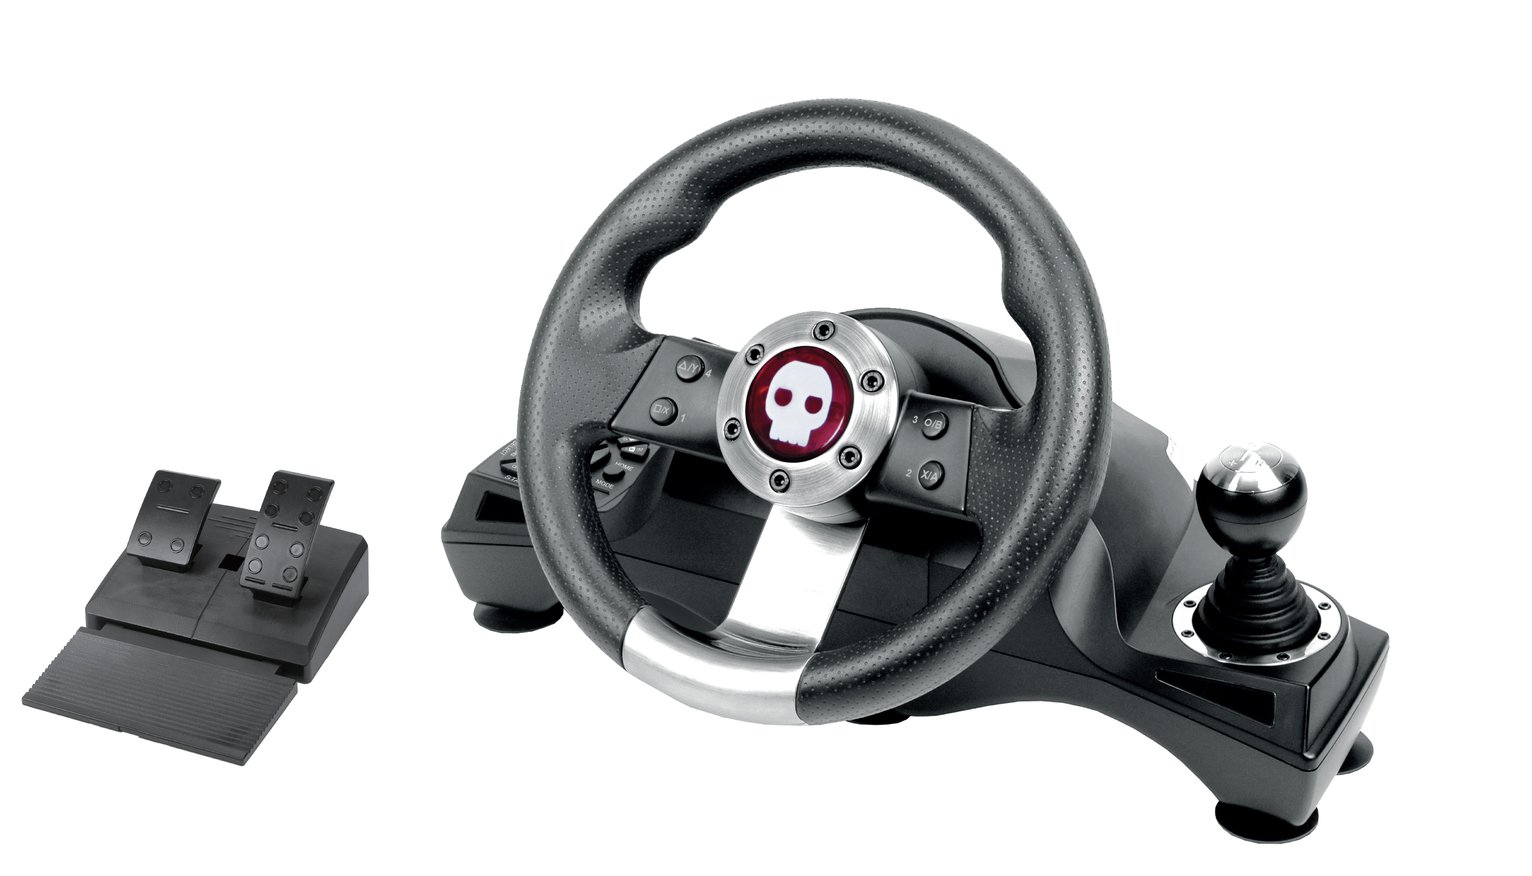 Numskull Pro Steering Wheel for Xbox One, PS4, PS3 & PC Review